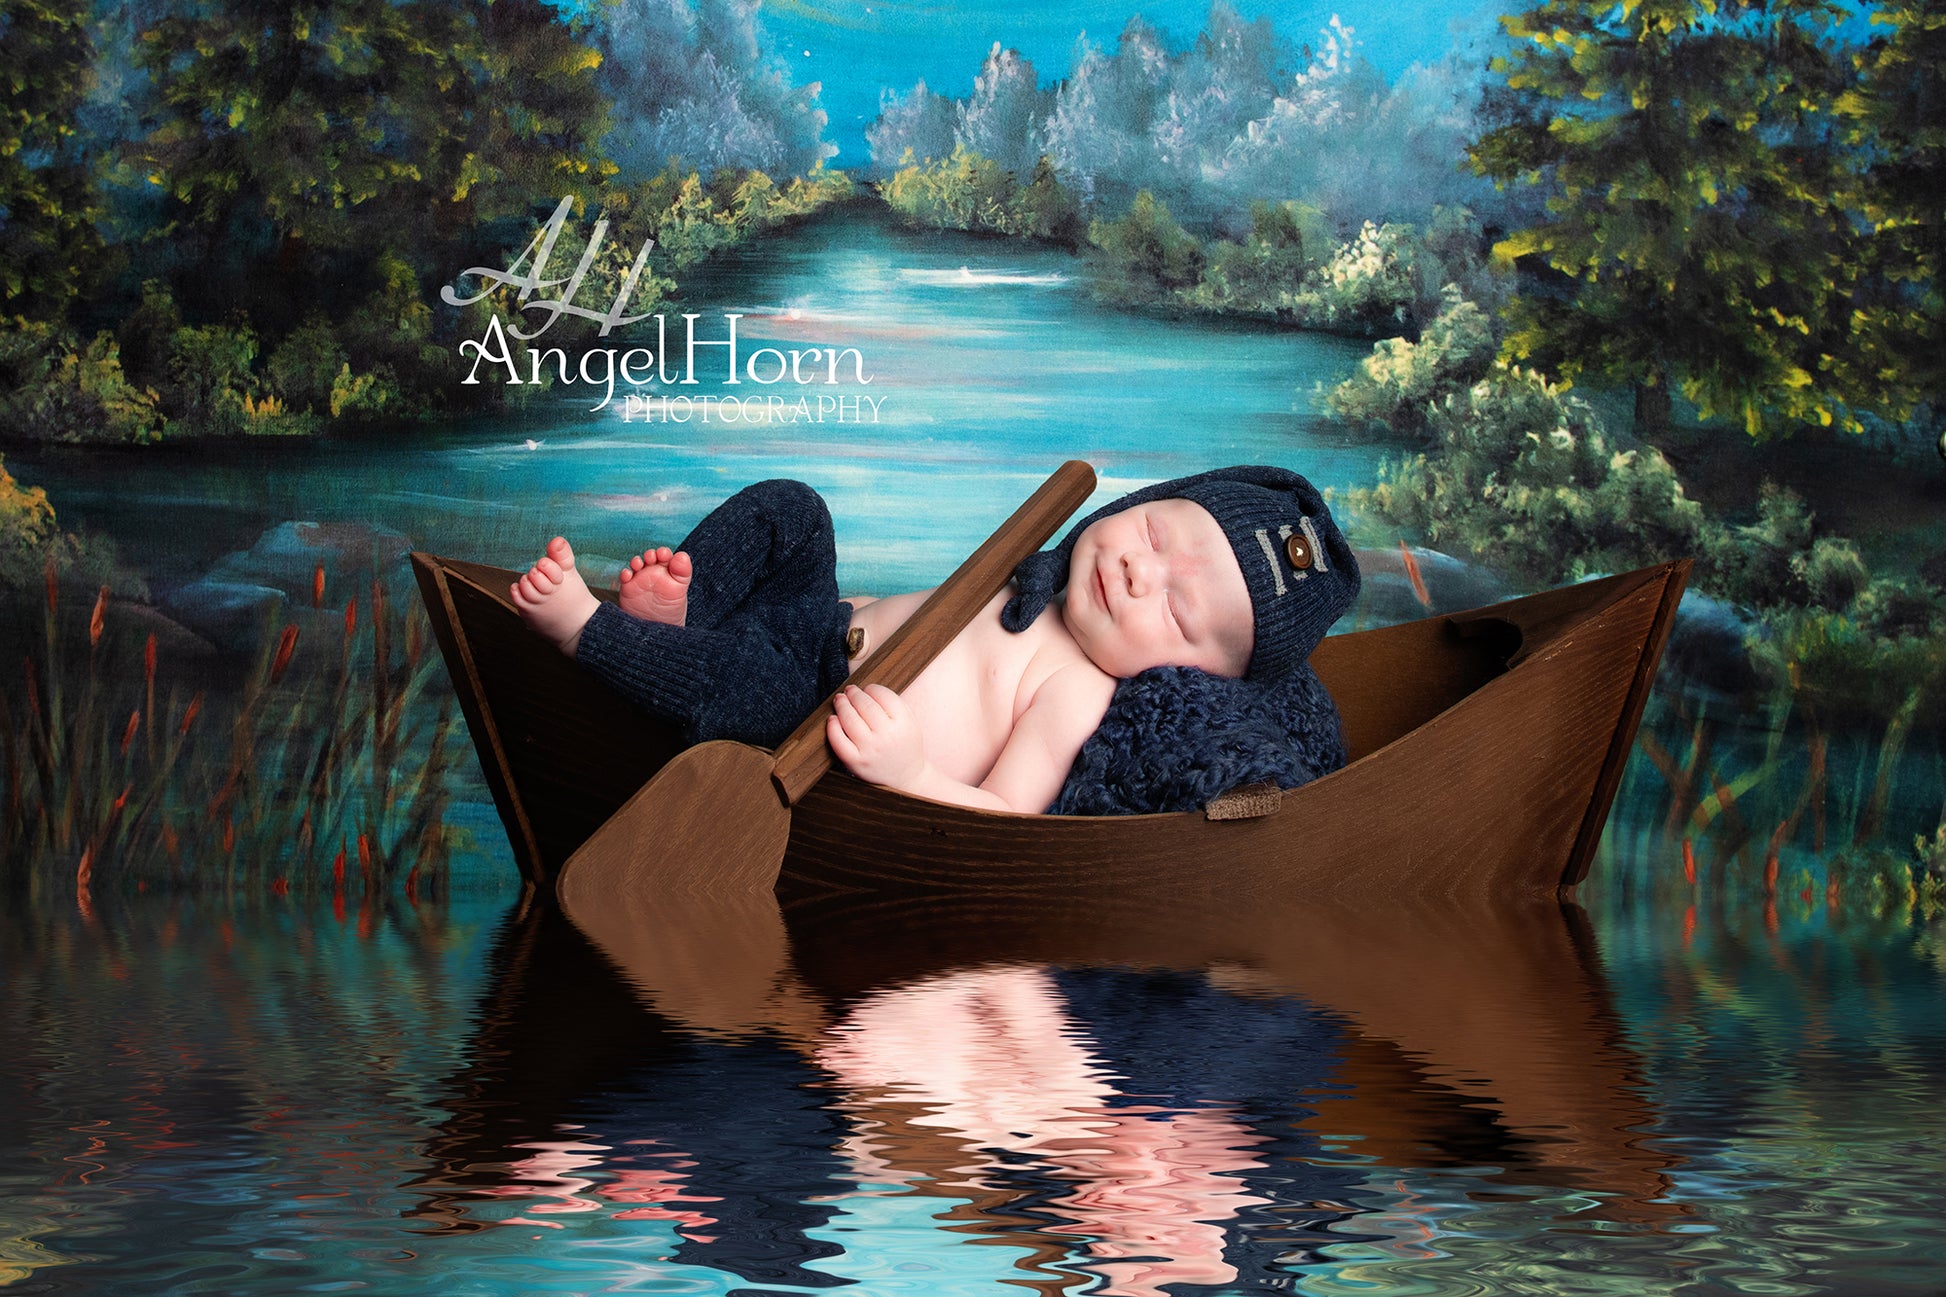 LITTLE NOAHS ARK Boat Photo Prop, Tiny Little Sail Boat Infant Photography,  Infant Fishing Boat Photo Props, Best Baby Fishing Prop Images -  Canada